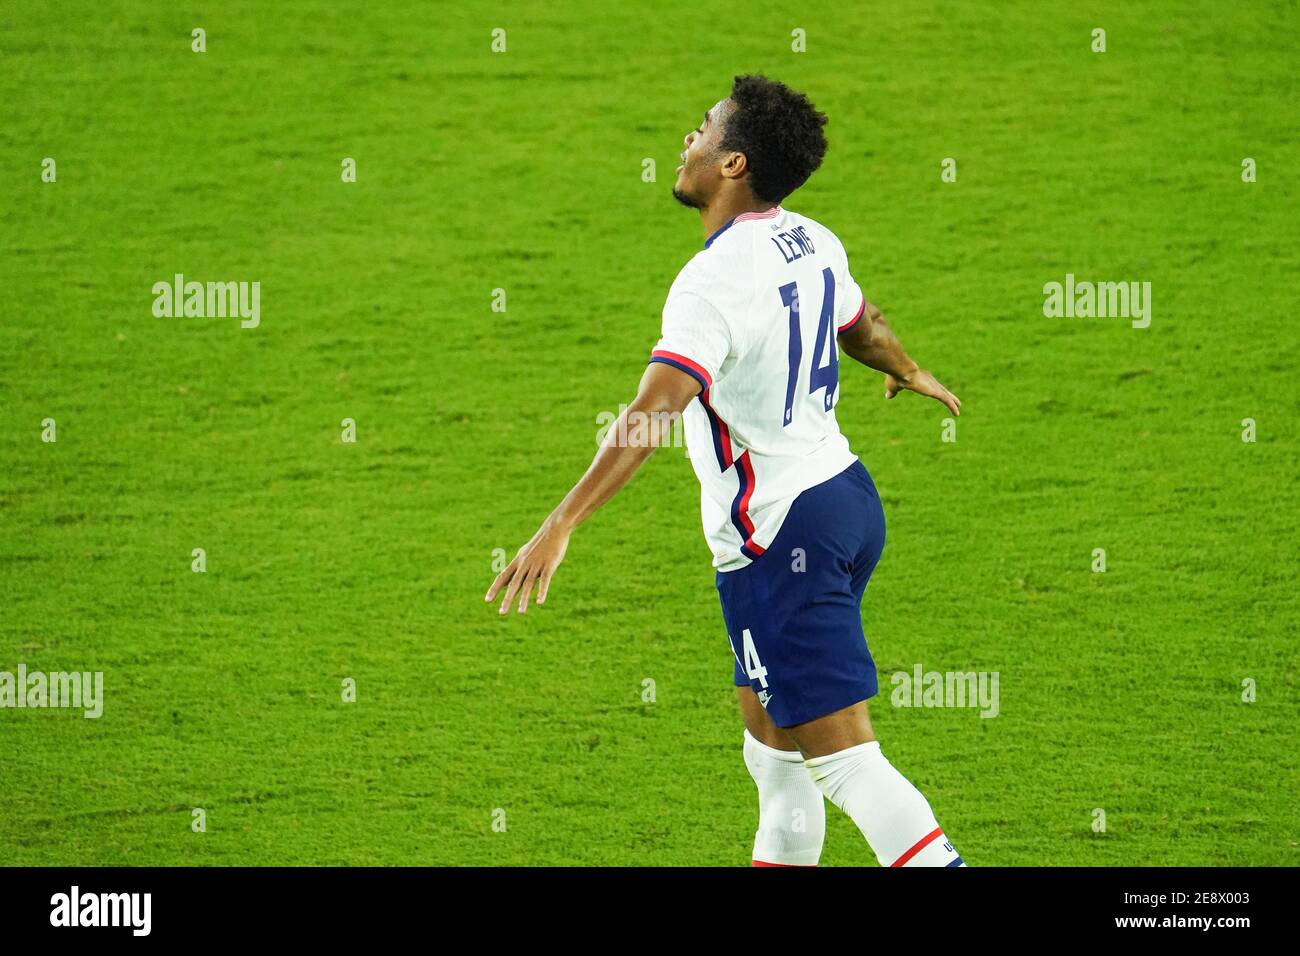 Orlando, Florida, USA, January 31, 2021, USA forward Jonathan Lewis #14 Celebrate after scoring during an International Friendly Match against Trinidad and Tobago.  (Photo Credit:  Marty Jean-Louis) Stock Photo